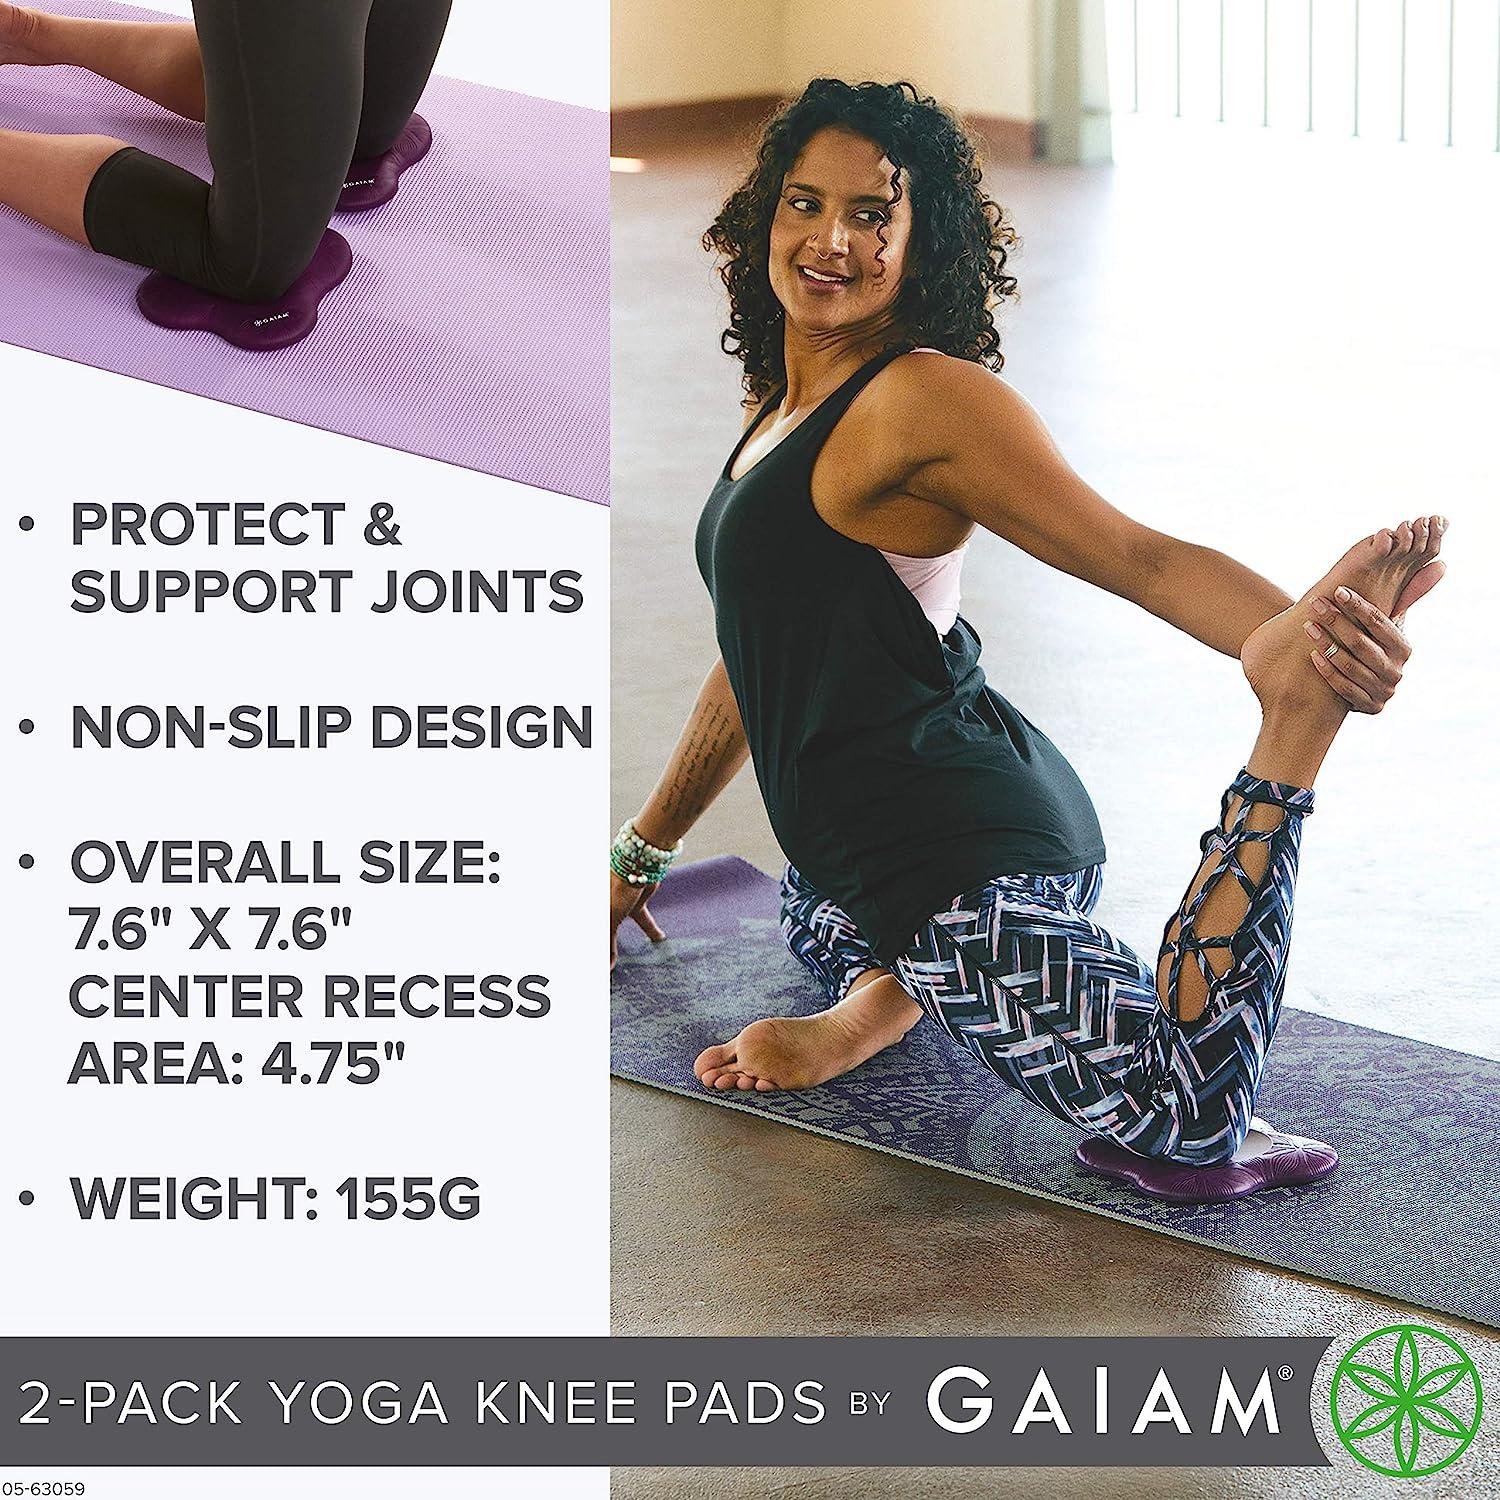 Gaiam Yoga Knee Pads (Set of 2) - Yoga Props and Accessories for Women /  Men Cushions Knees and Elbows for Fitness, Travel, Meditation, Kneeling,  Balance, Floor, Pilates